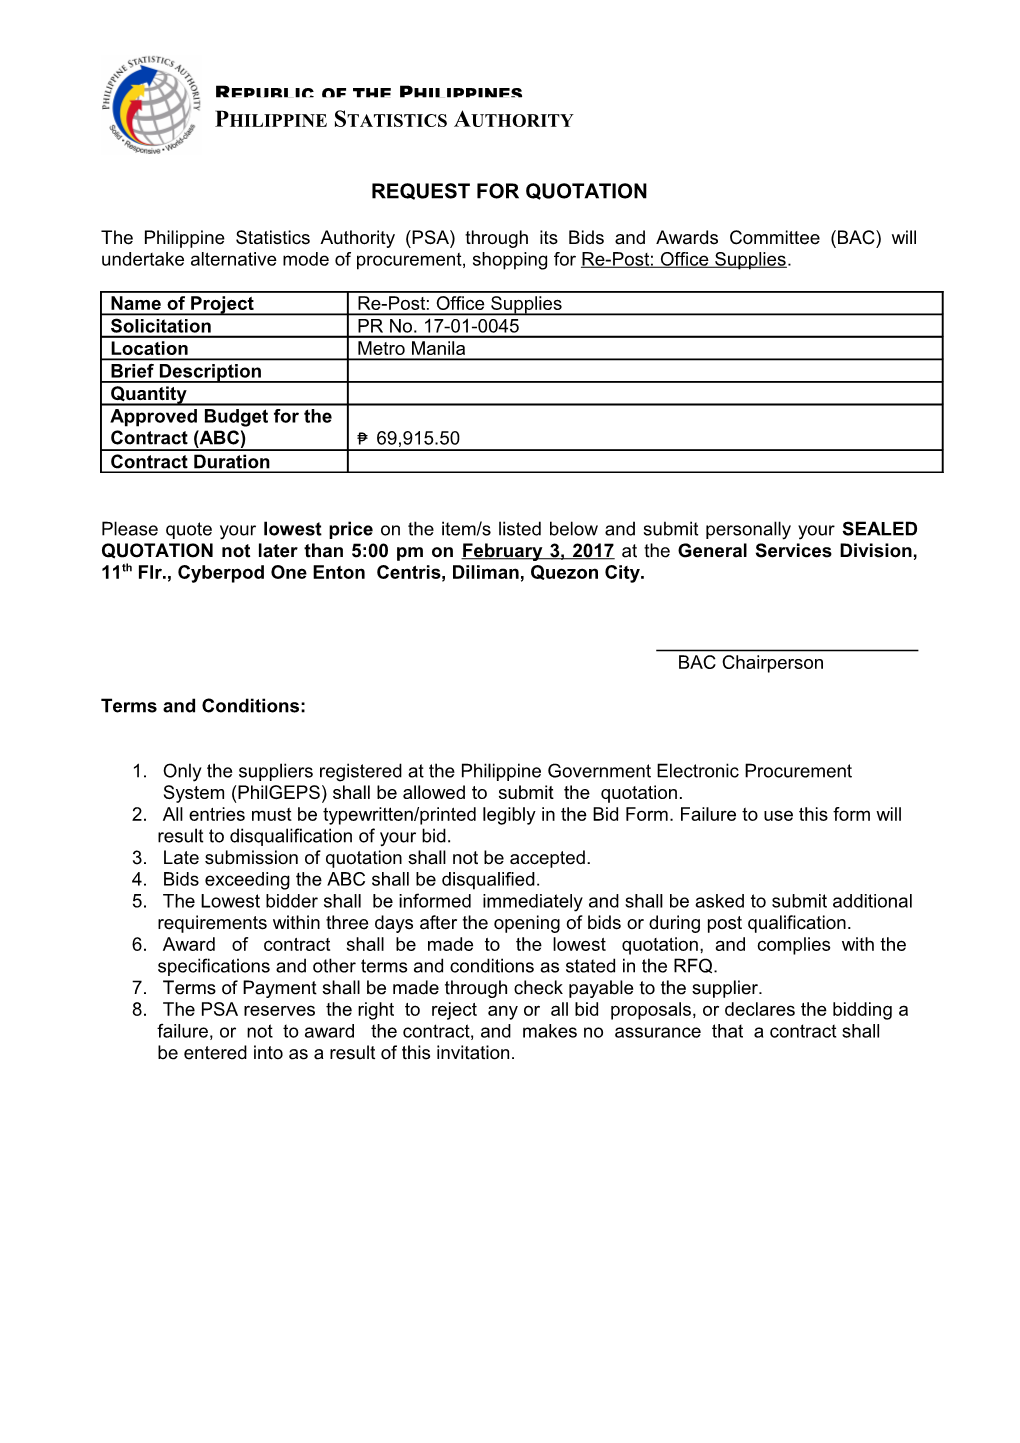 Request for Quotation s41